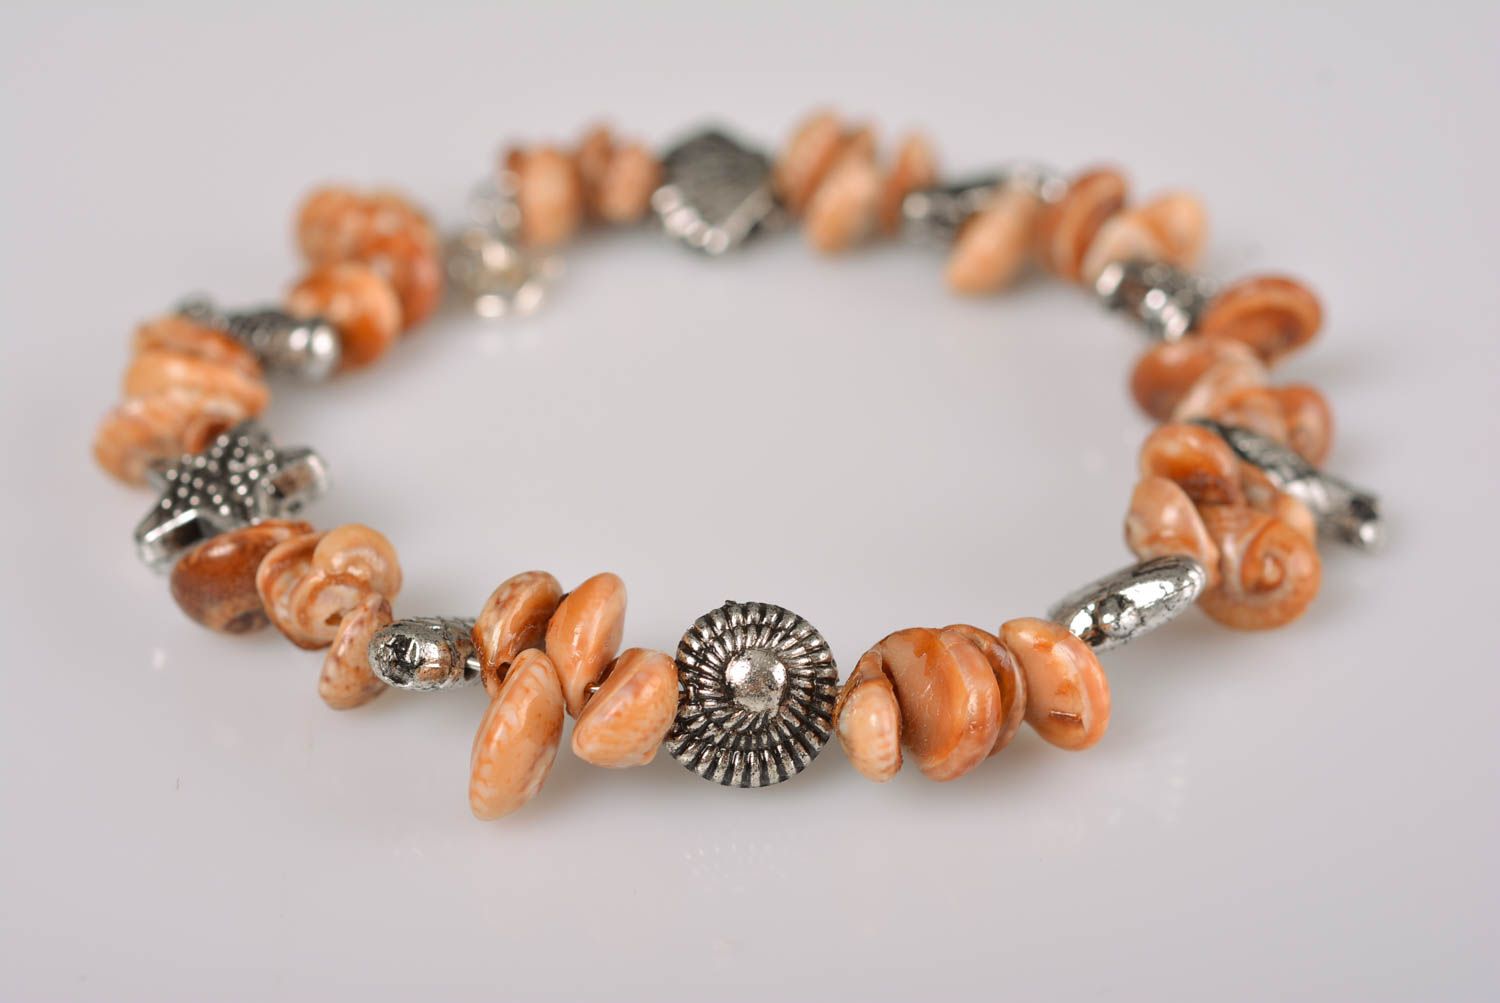 Handmade thin laconic wrist bracelet with seashells and metal charms for women photo 1